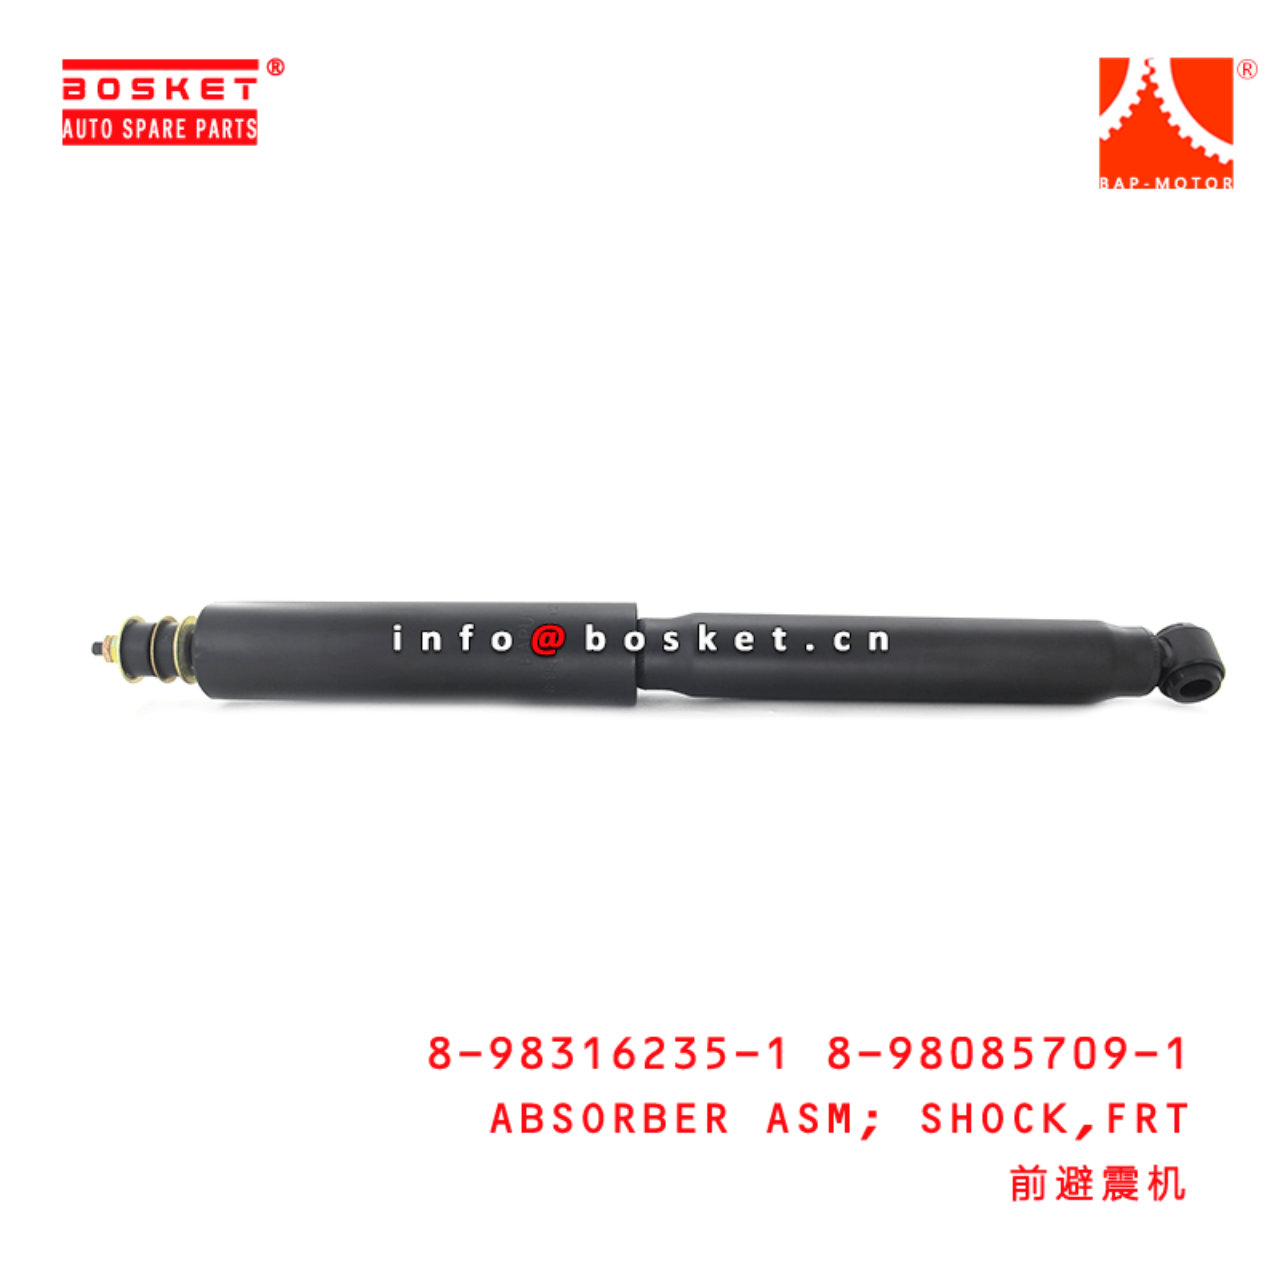 8-98316235-0 8-98085709-0 Front Shock Assembly Absorber 8983162350 8980857090 Suitable for ISUZU NMR